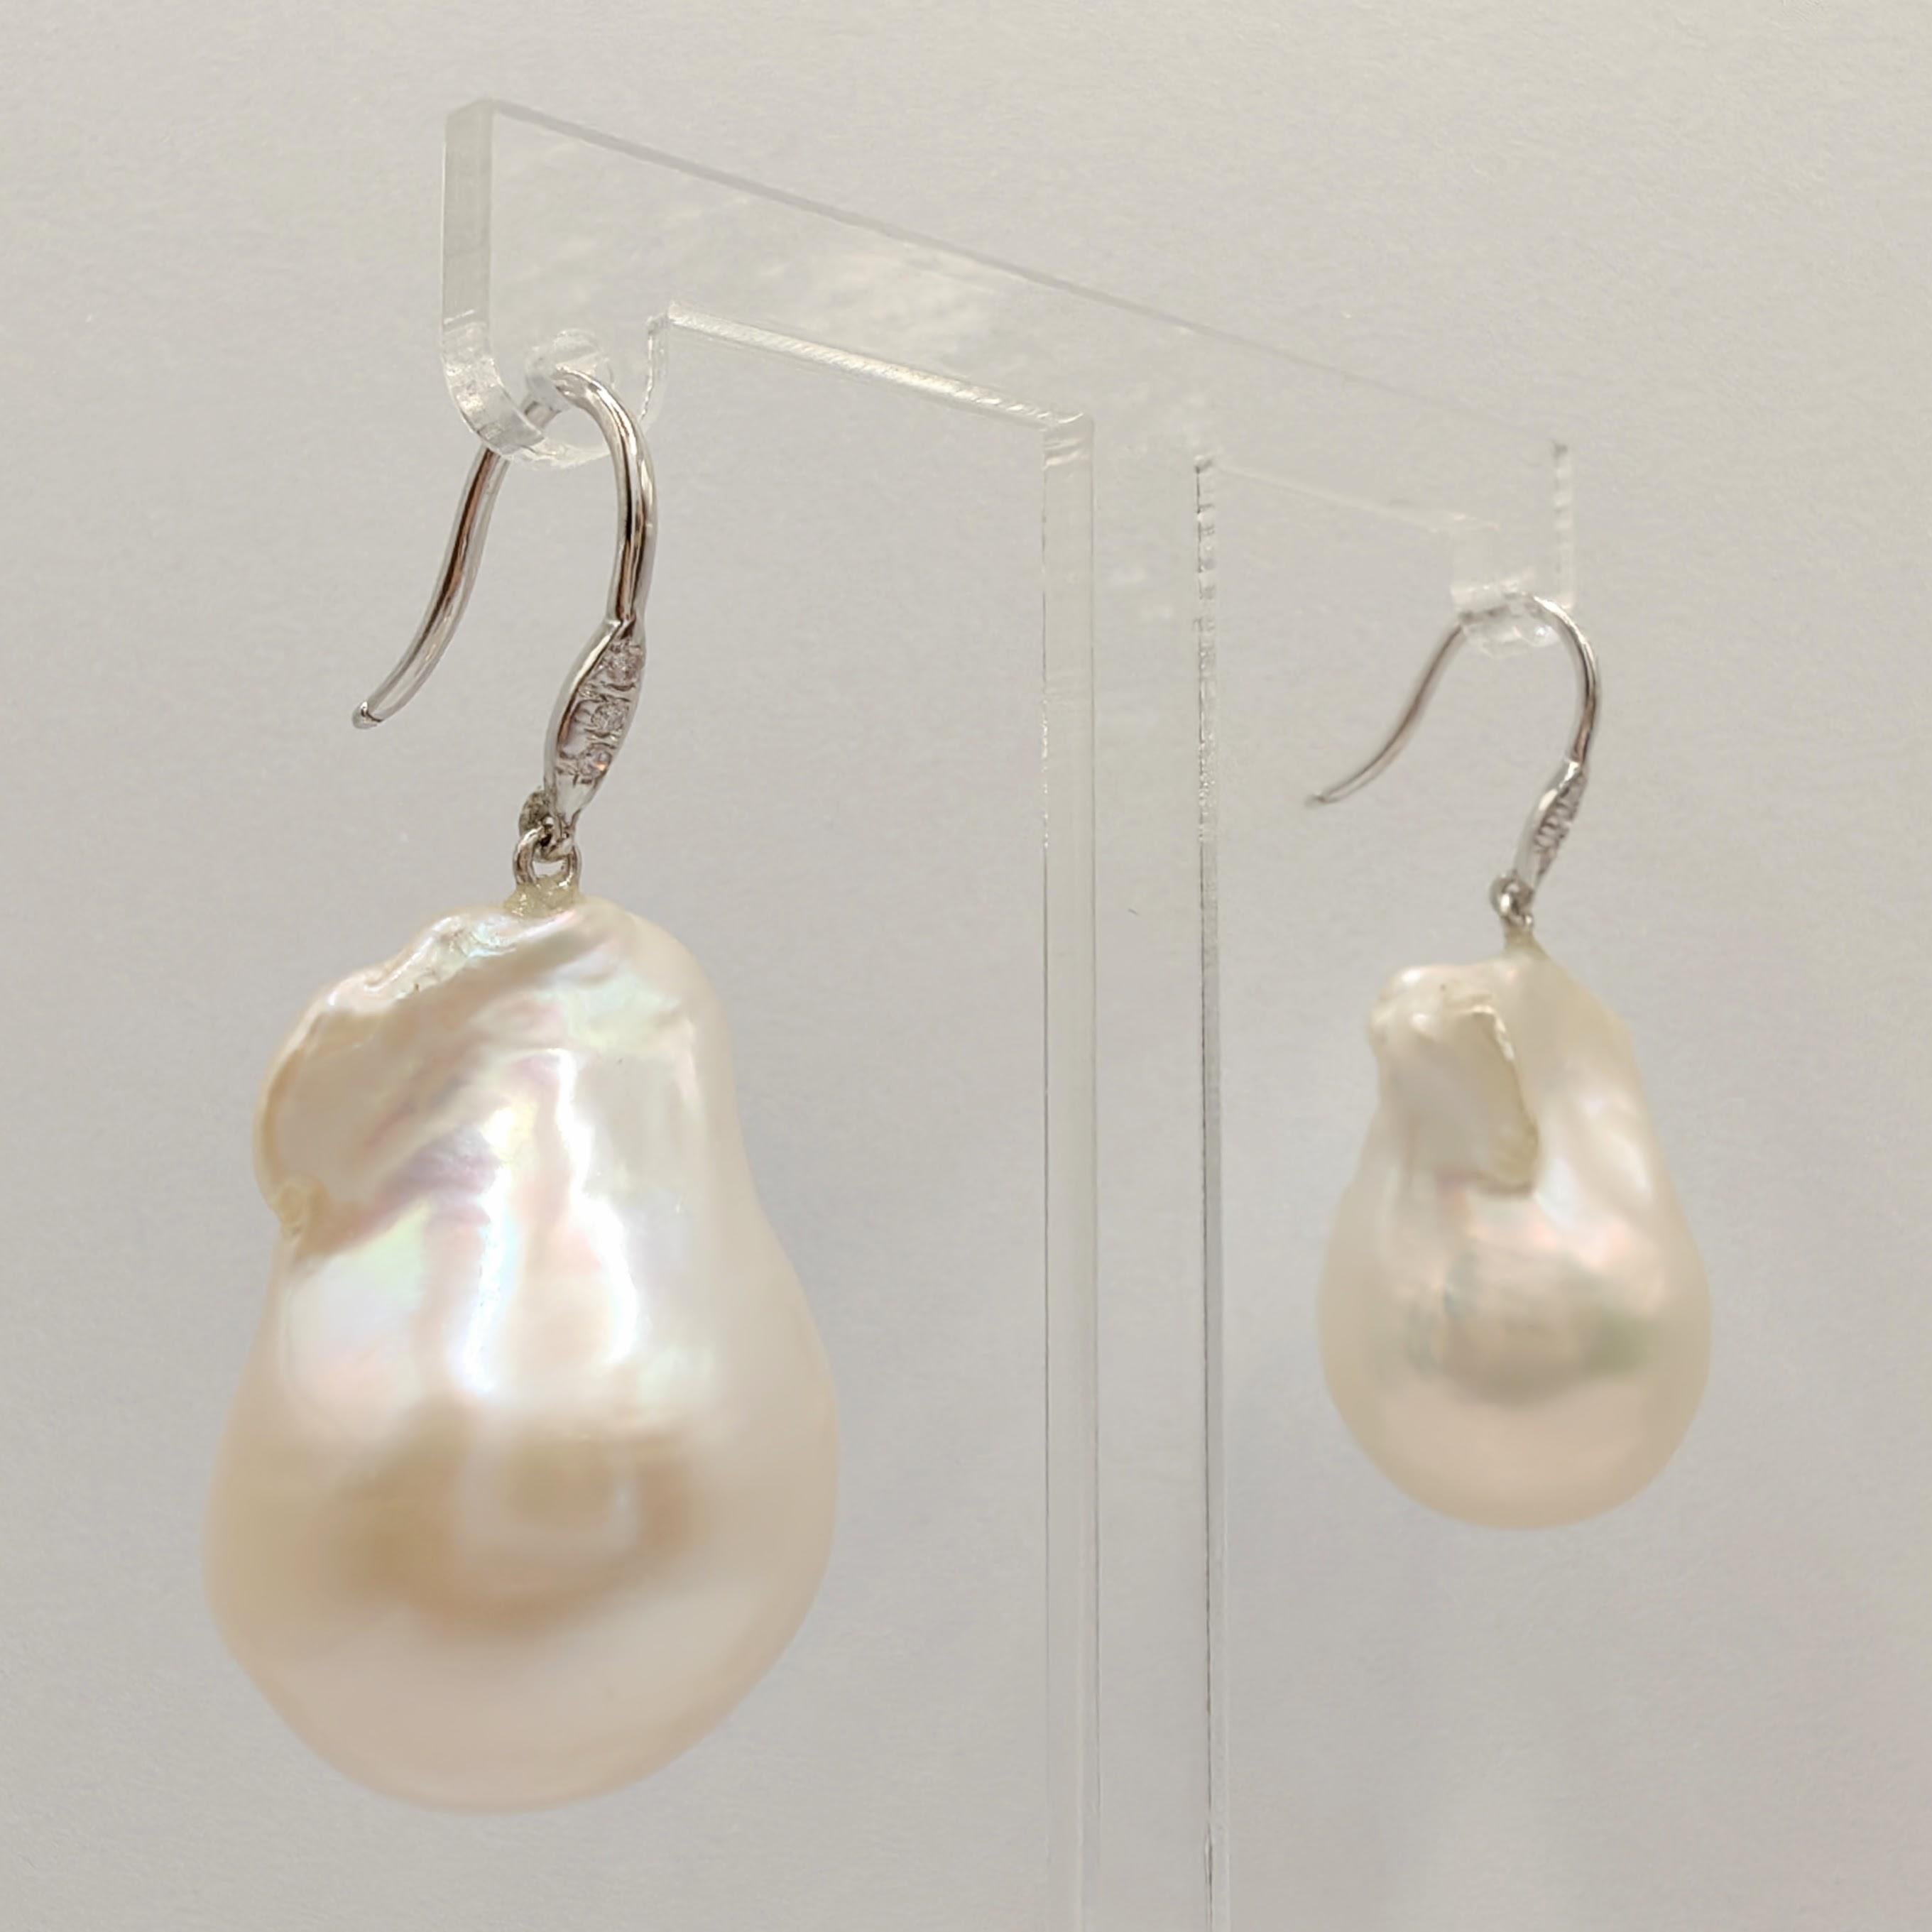 Uncut Baroque Pearl Diamond Dangling Drop Earrings With 18K White Gold French Hooks